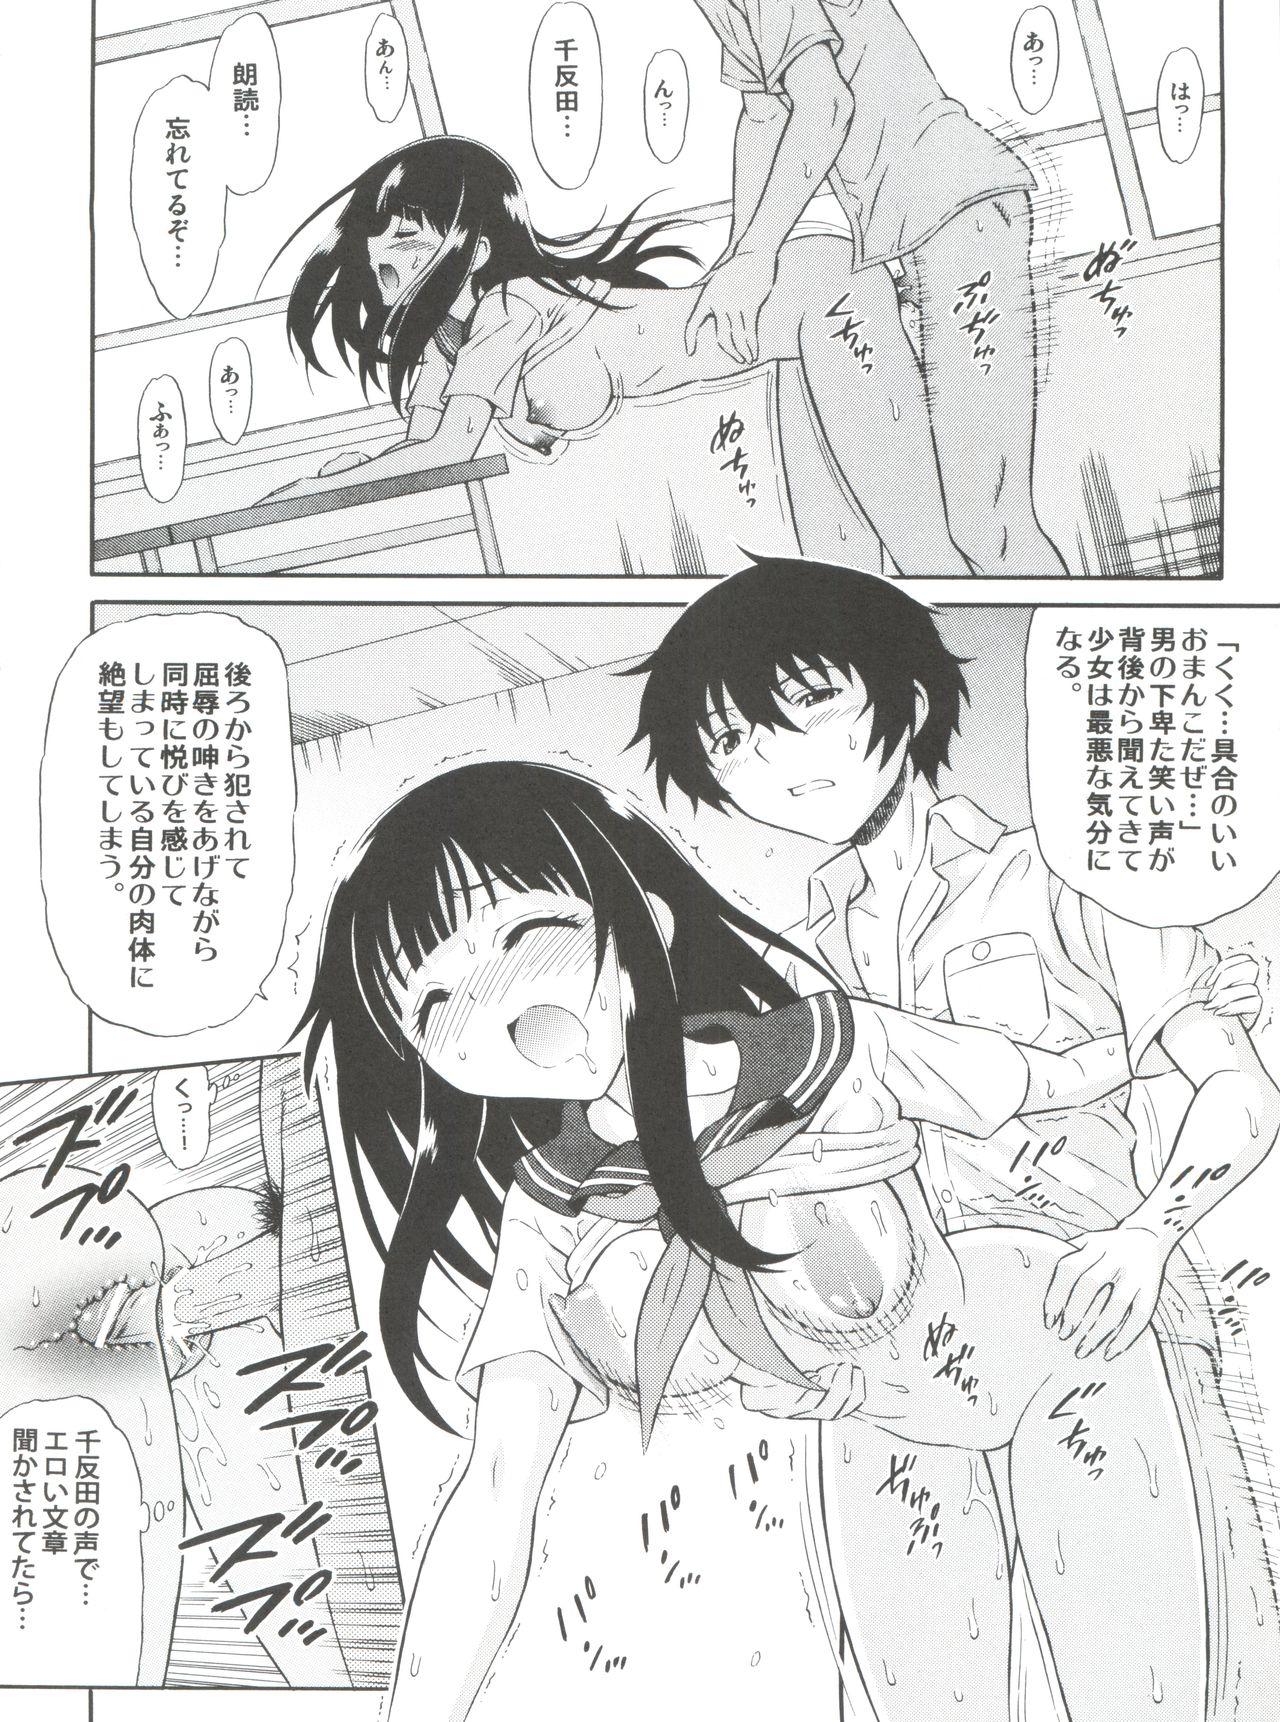 Cosplay Hot Candy - Hyouka Bro - Page 8